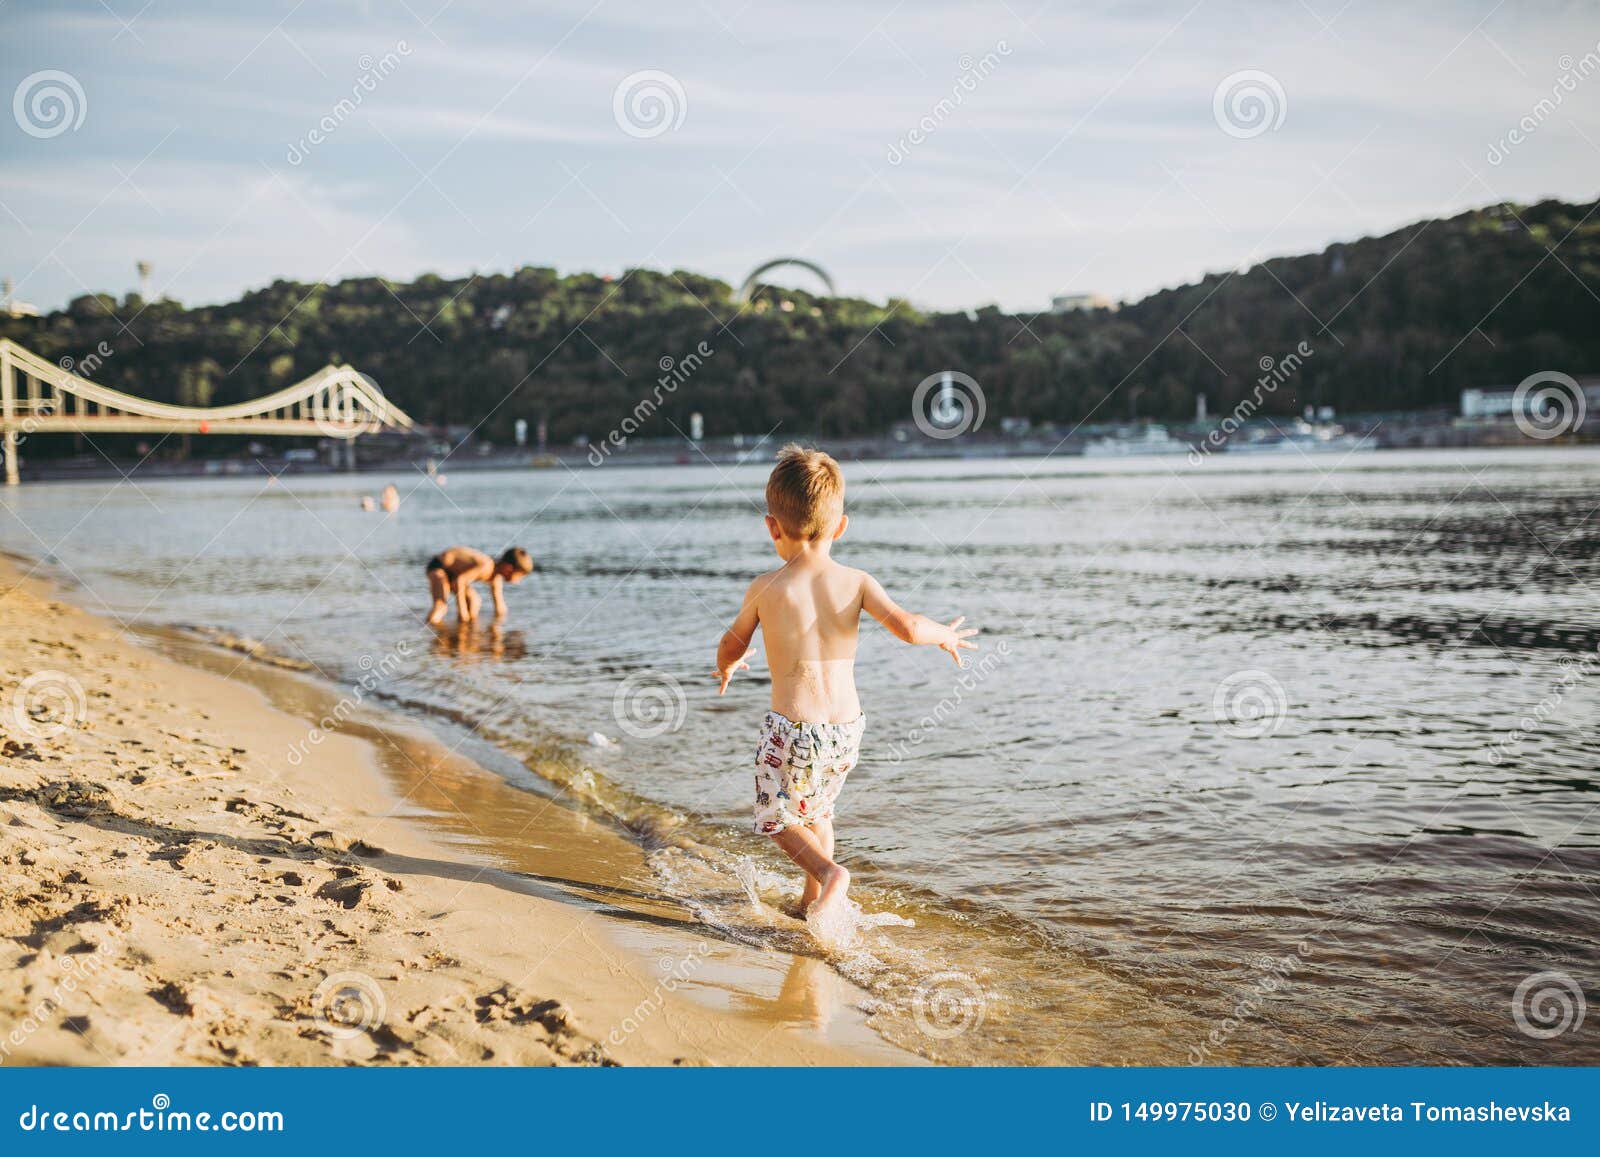 theme summer outdoor activities near the river on the city beach in kiev ukraine. little funny baby boy running along the river